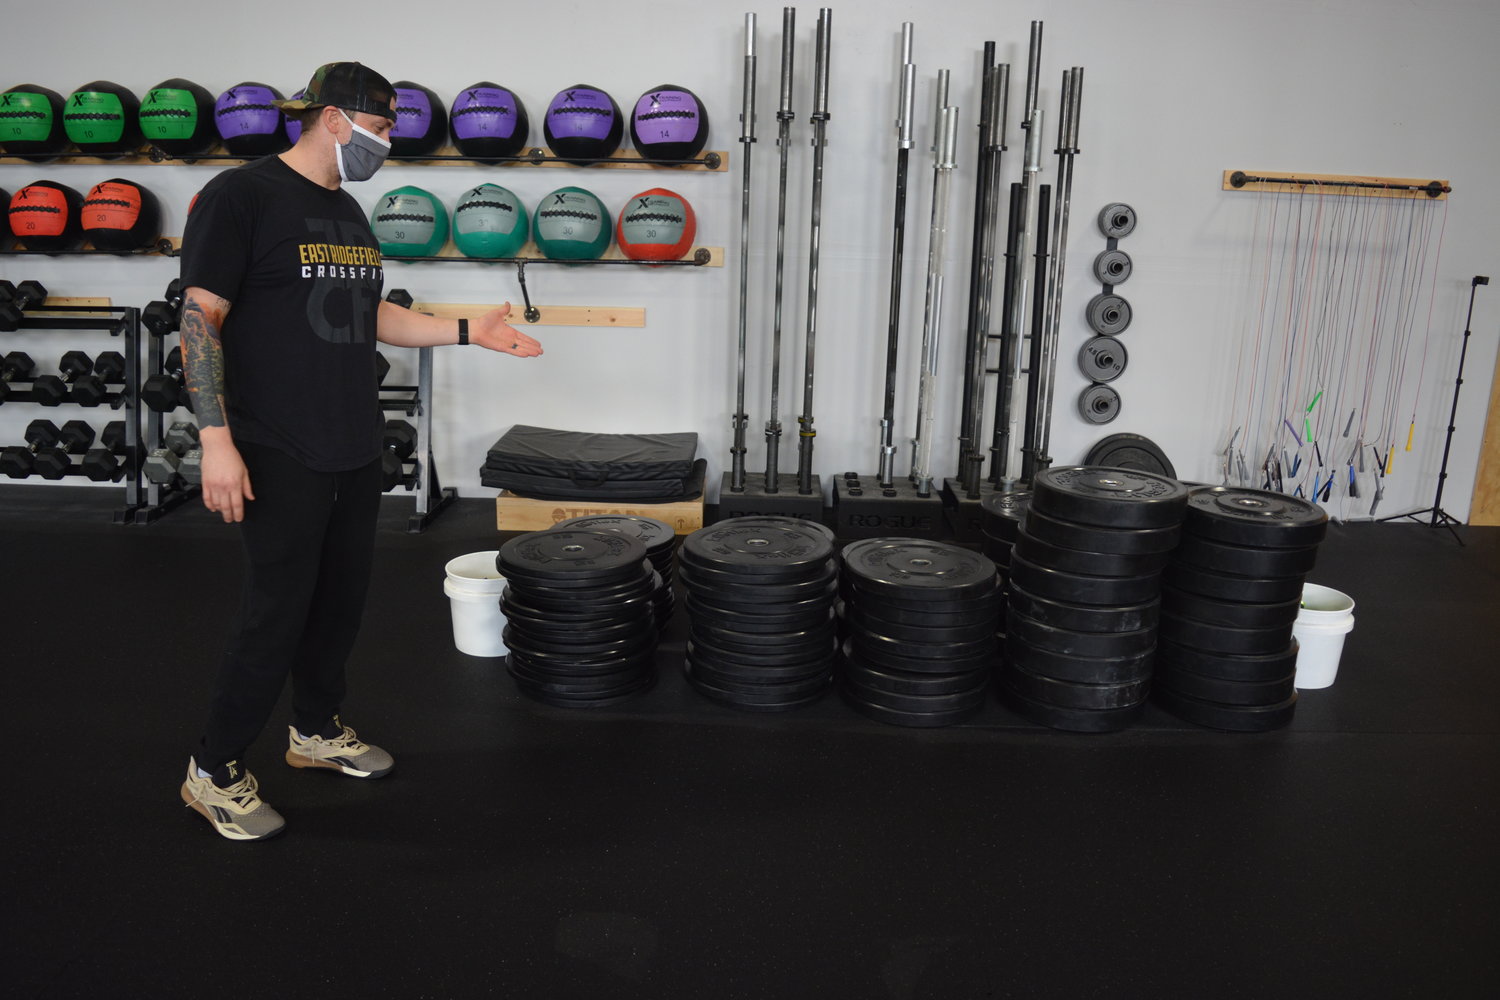 East Ridgefield CrossFit owner Kevin Cummo talks about the multiple sizes of weights the gym has, allowing anybody of any skill set to participate.